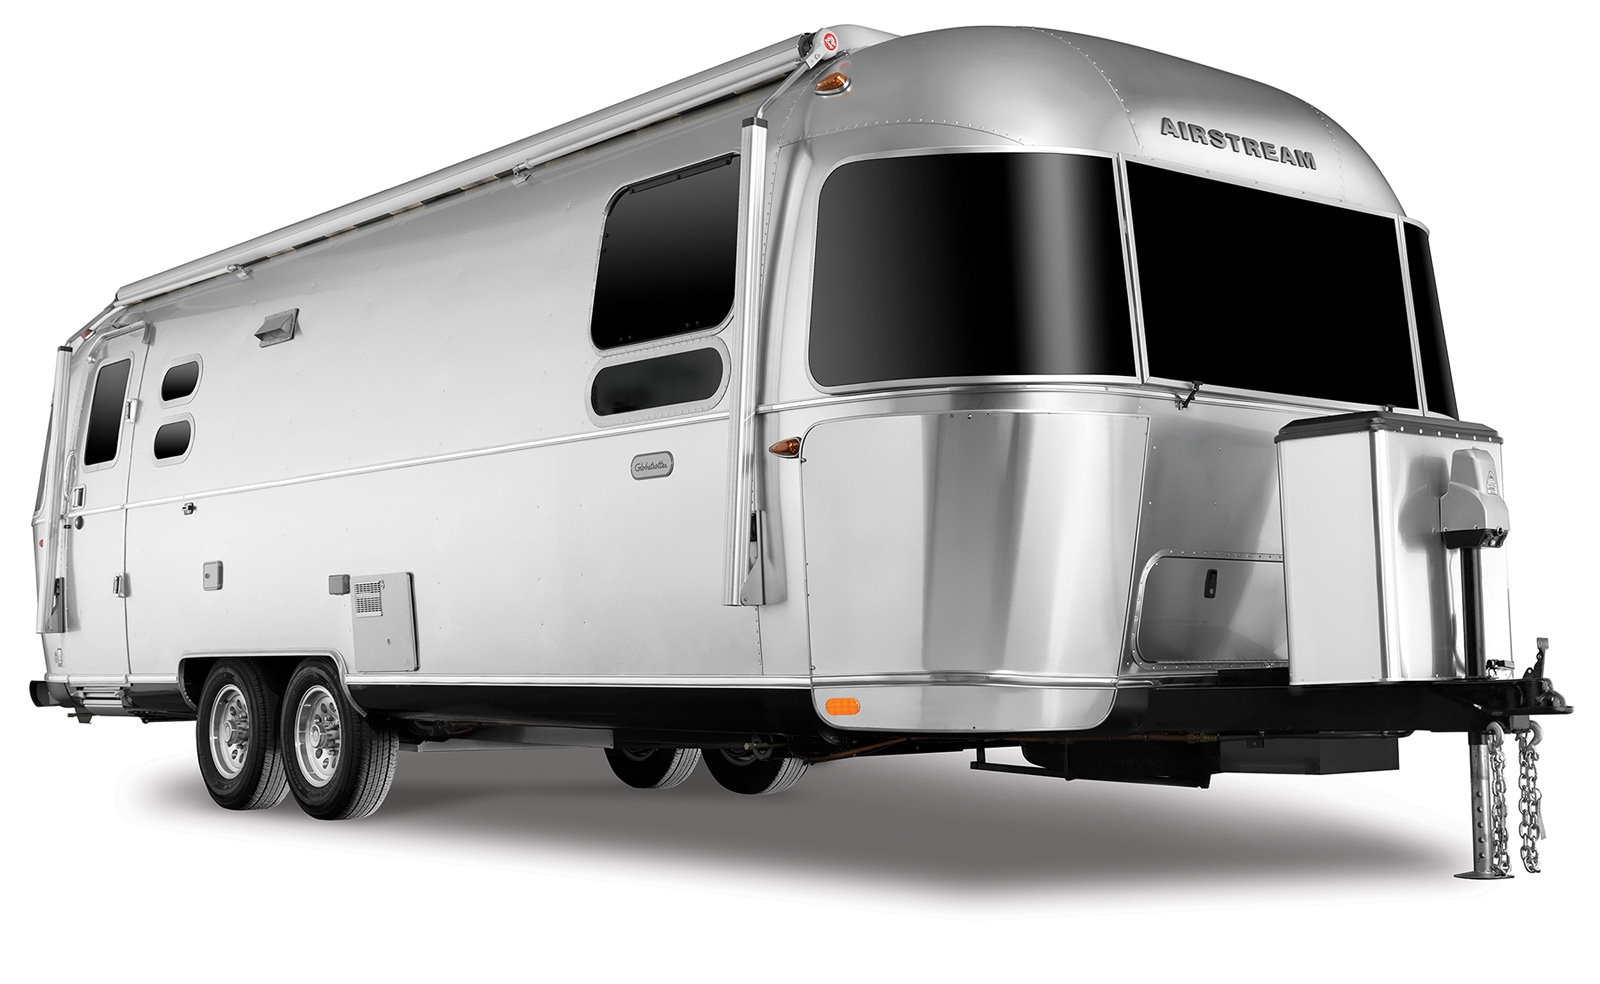 AT and T's LTE is now an option on all Airstream camping trailers | DeviceDaily.com